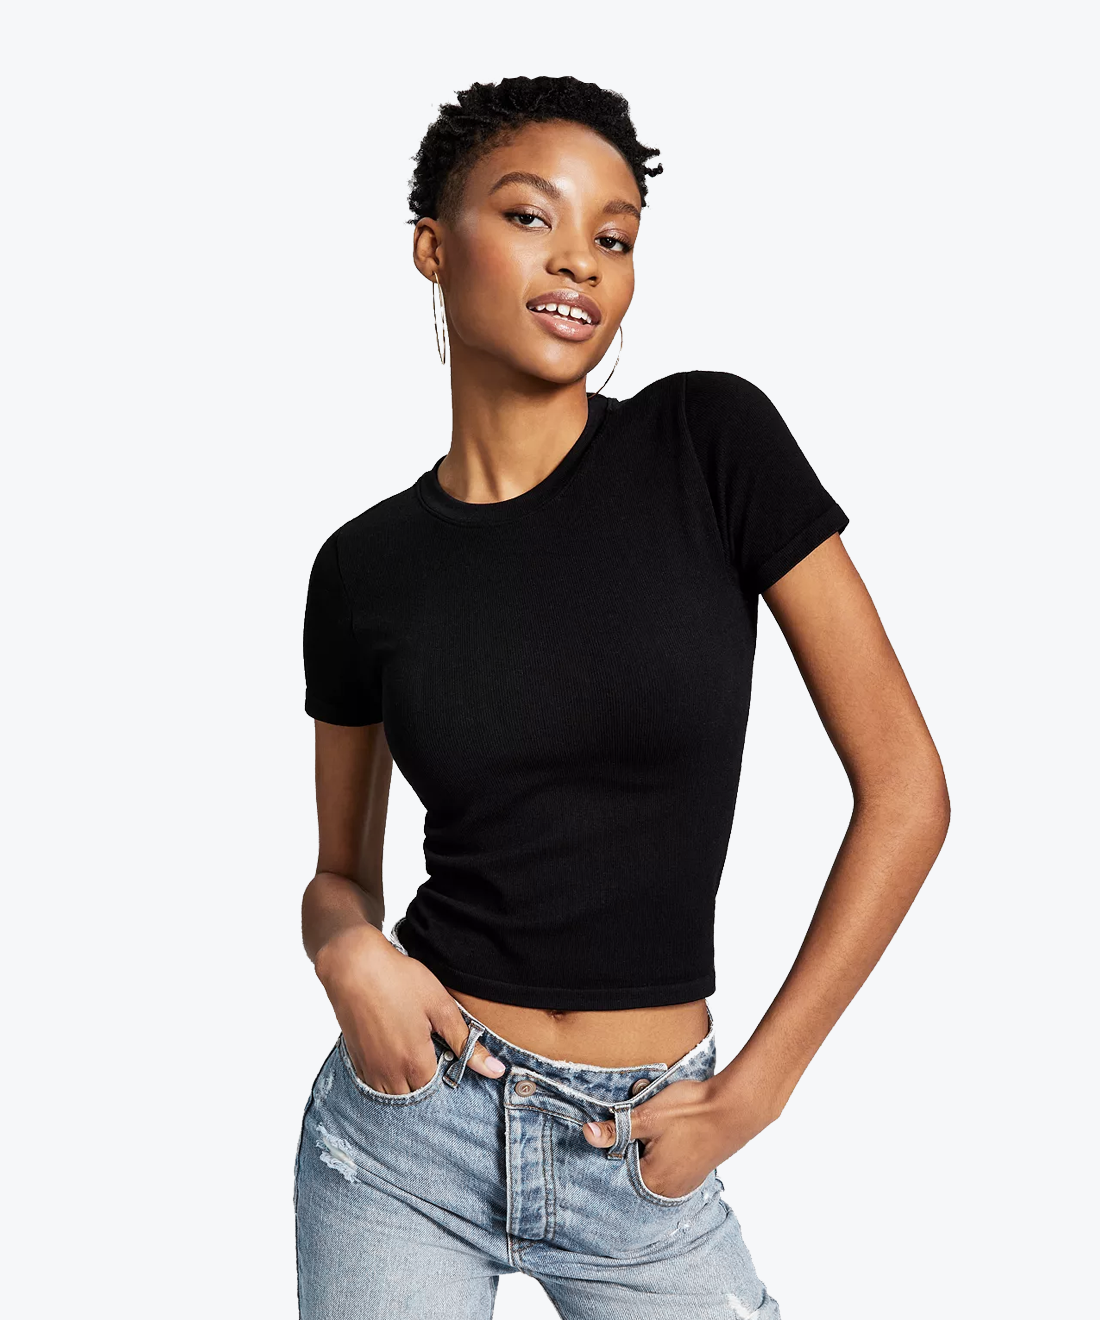 Tight cropped t-shirt